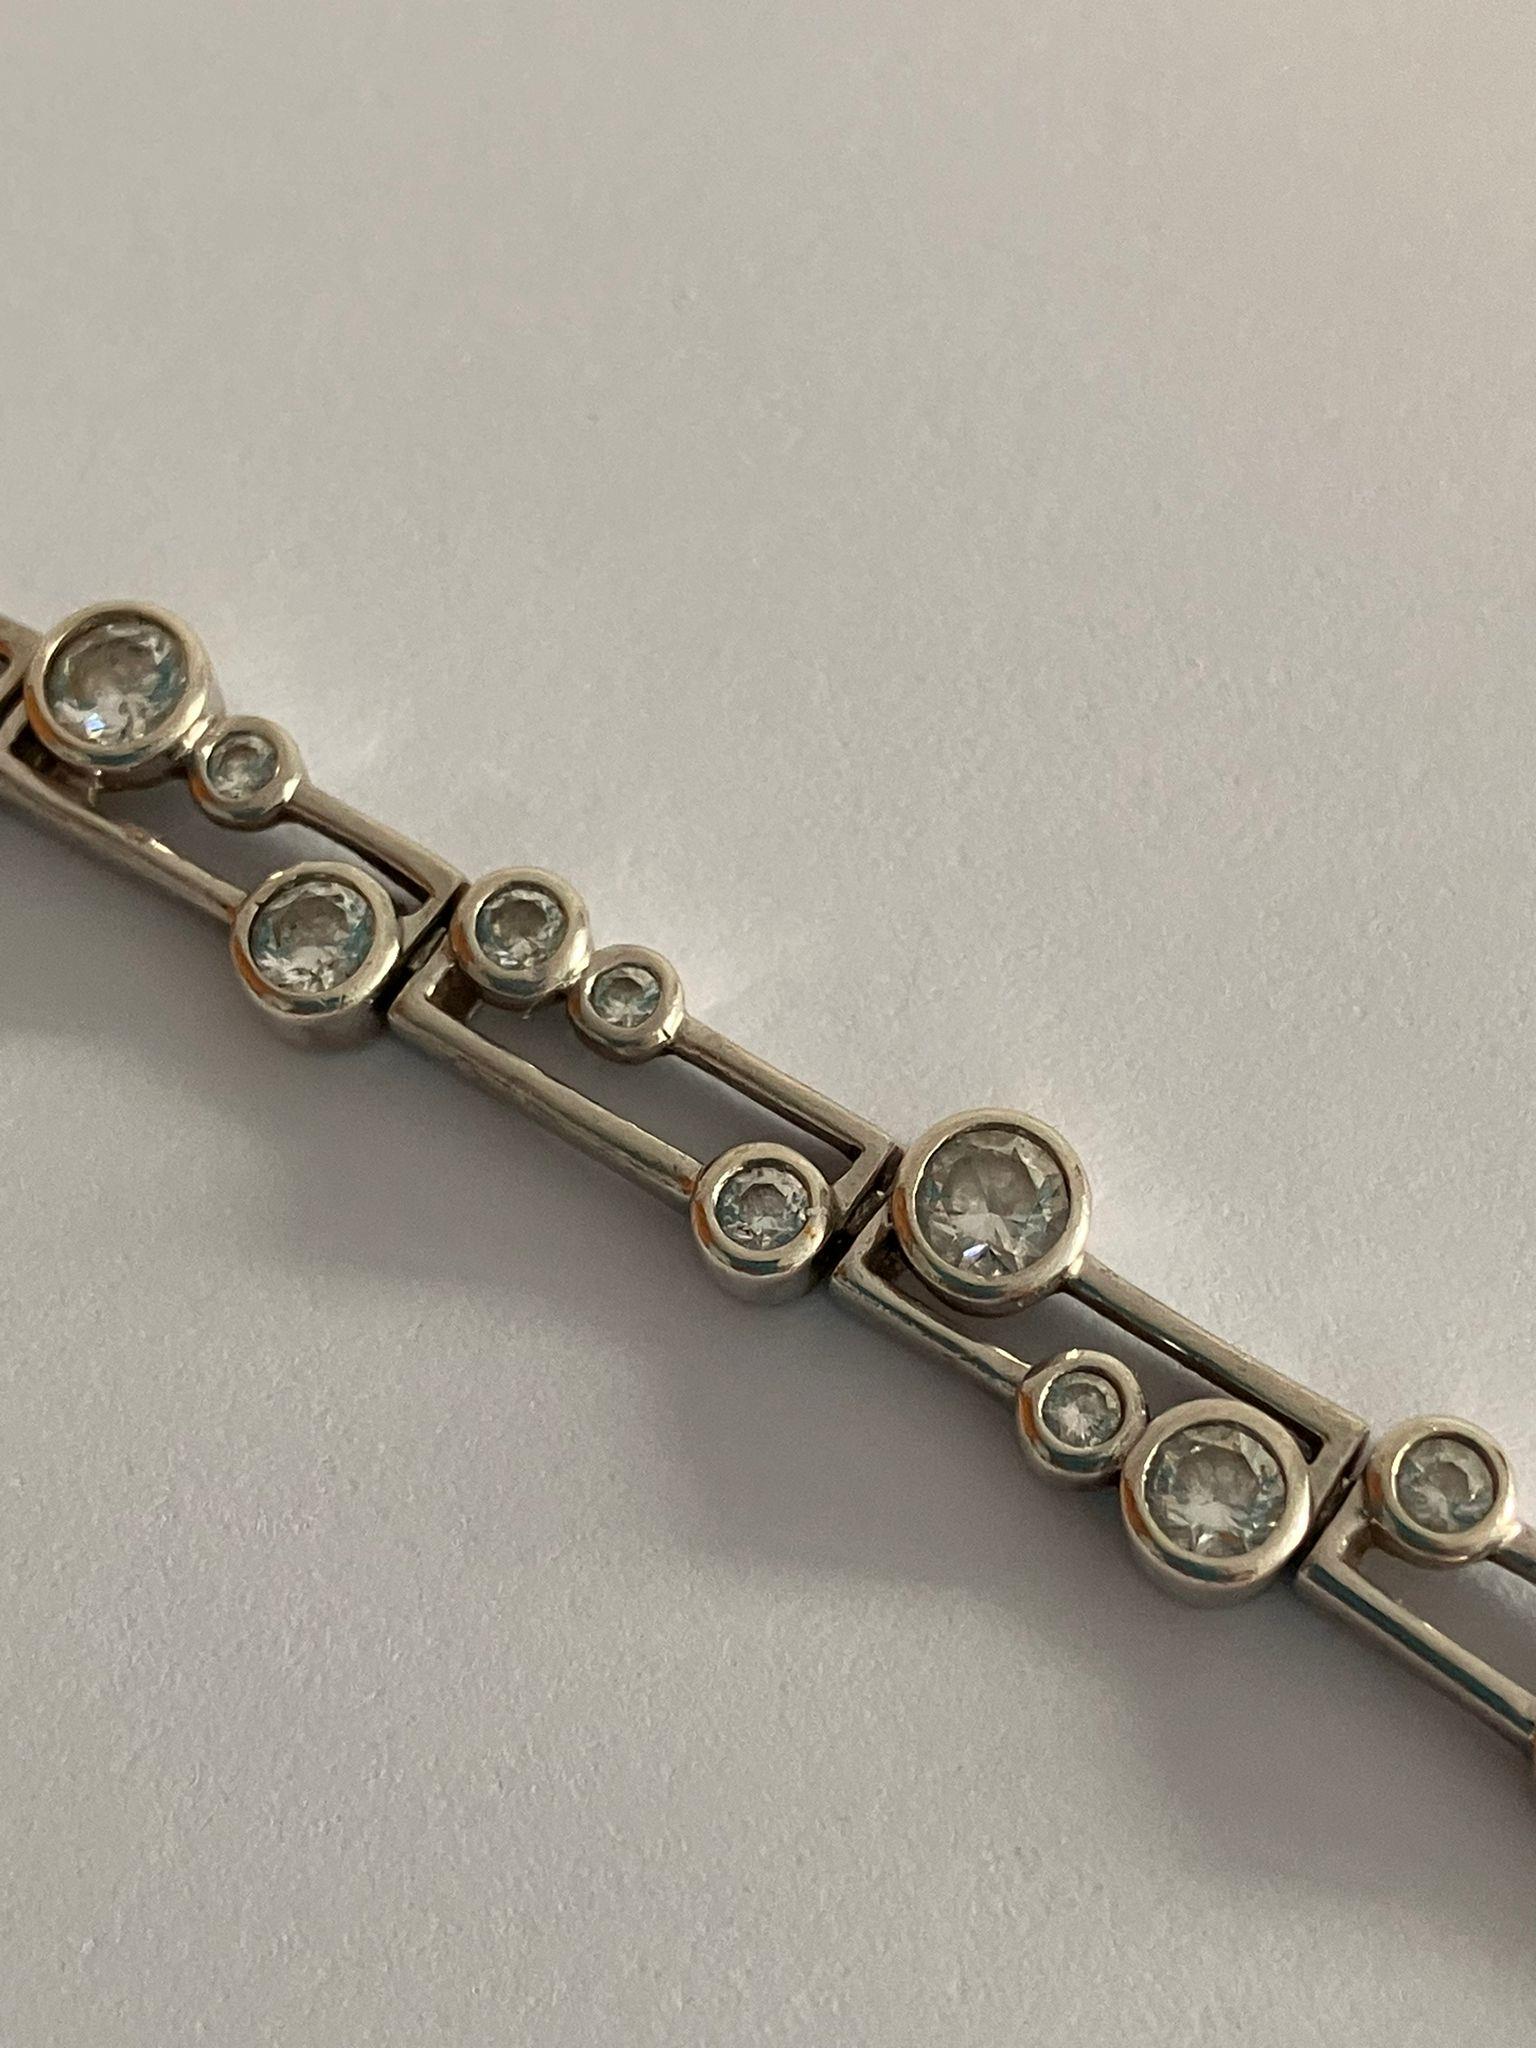 SILVER TENNIS BRACELET Set with sparkling cubic zirconia is in ‘Planet’ style. Full UK hallmark. - Image 3 of 3